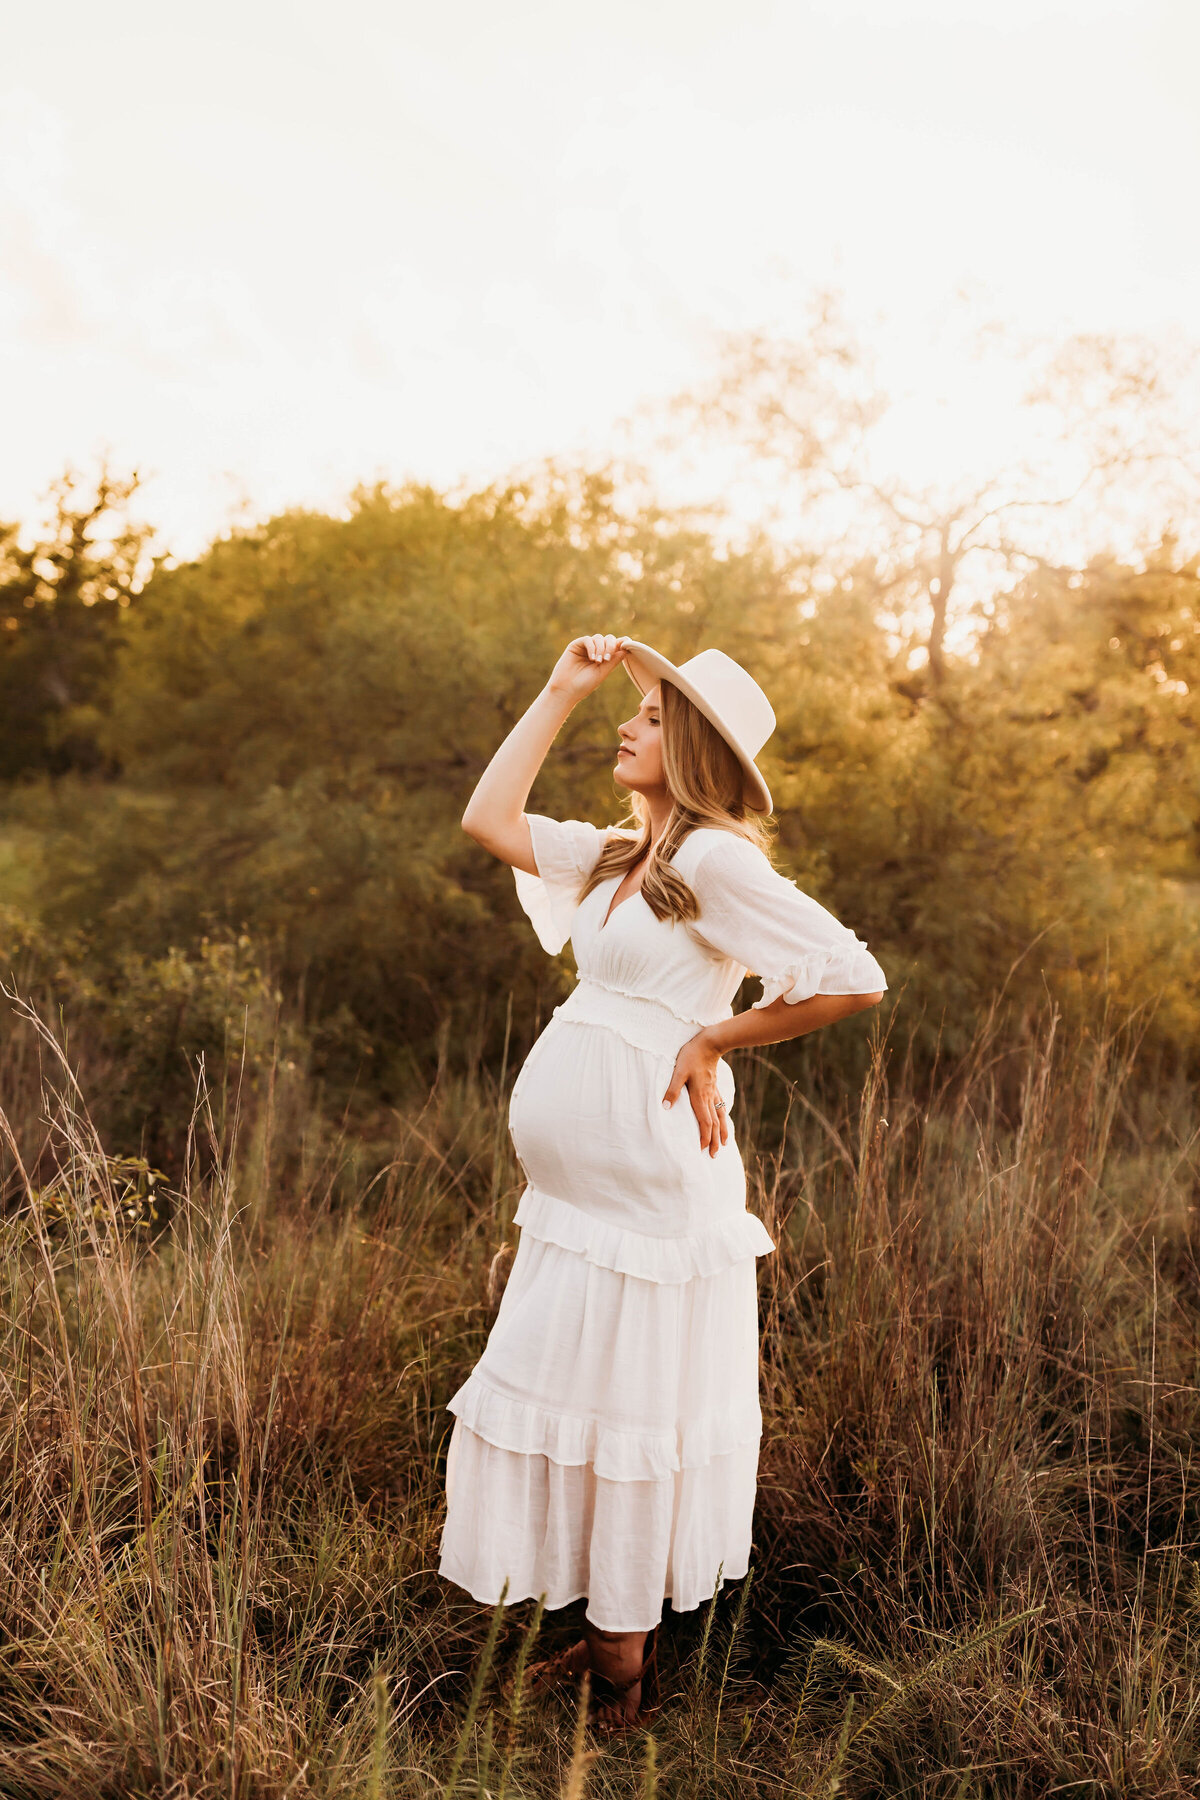 Expecting mother standing to the side in a white dress with one hand on her back and one hand holding her hat